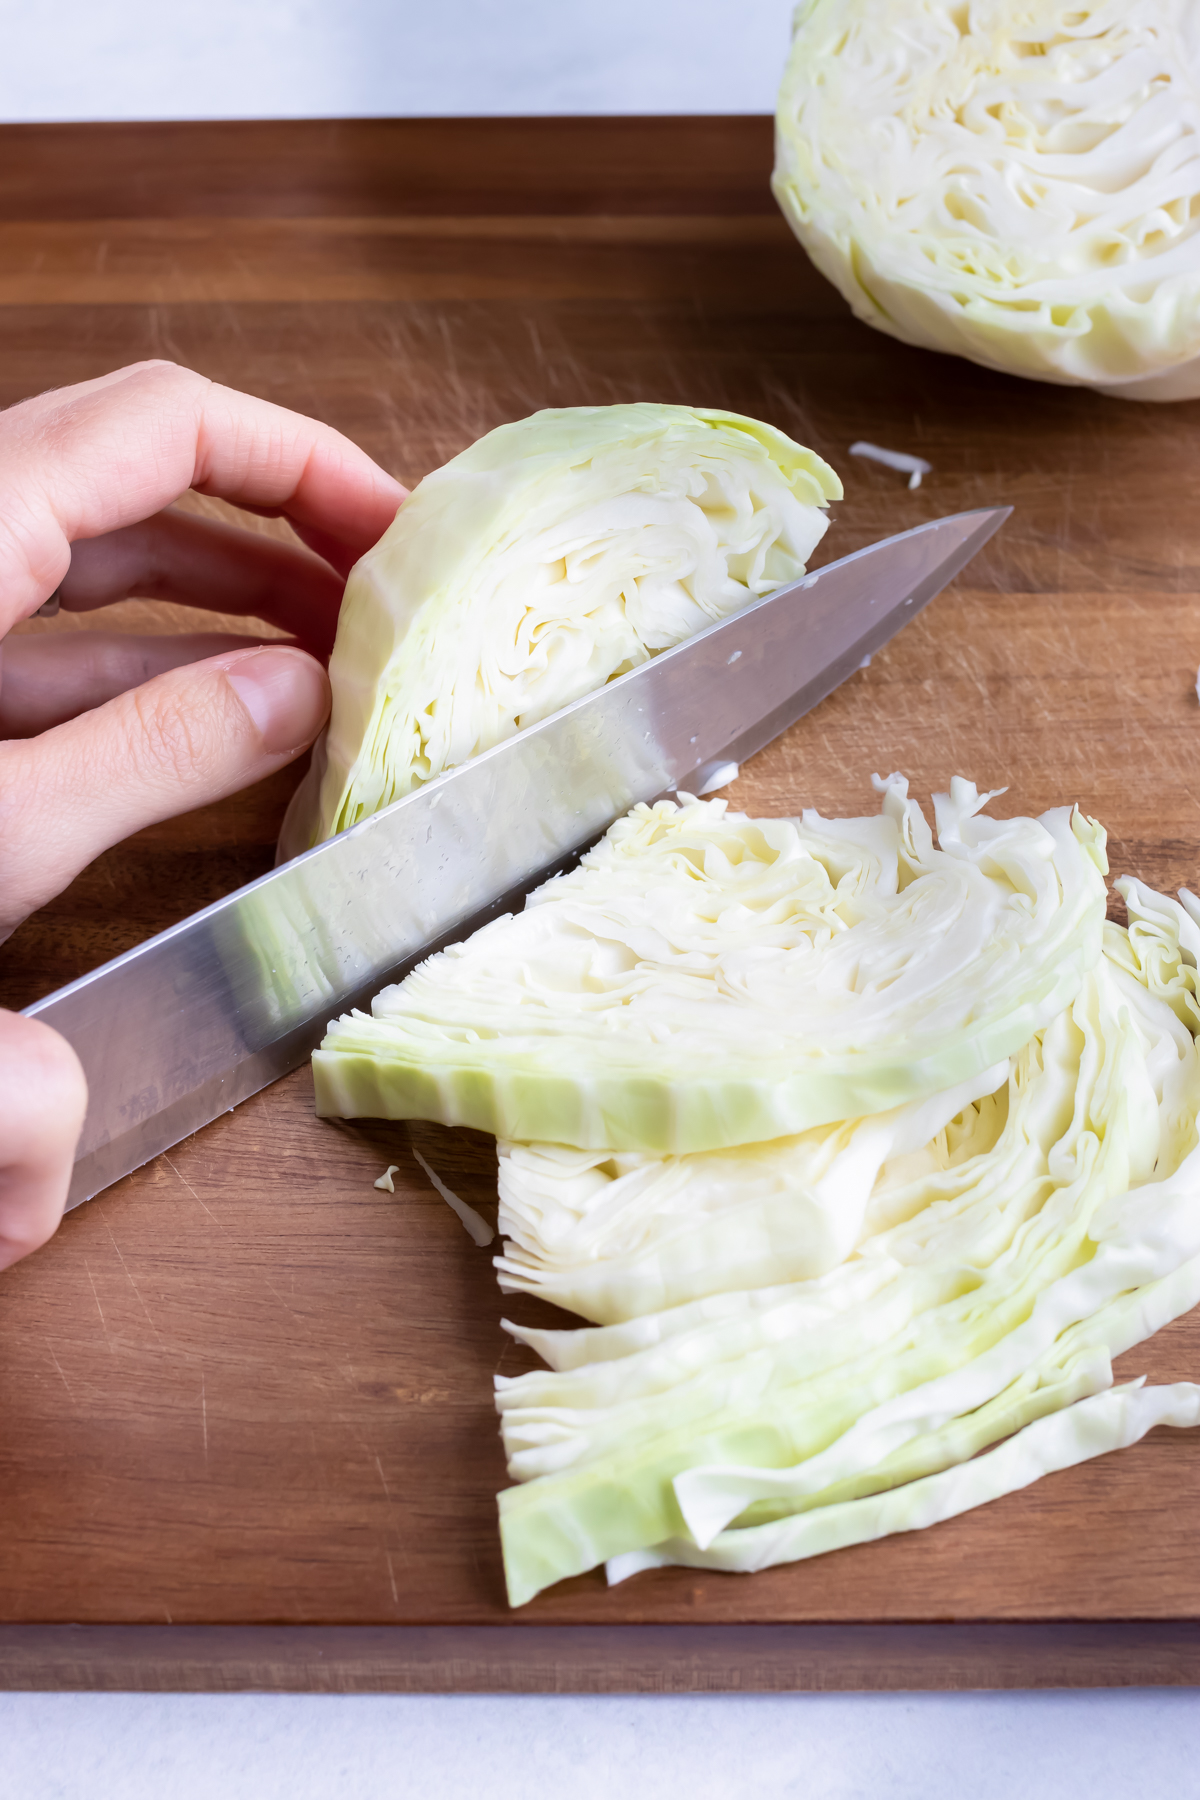 Shredding cabbage by thinly slicing it with a knife.